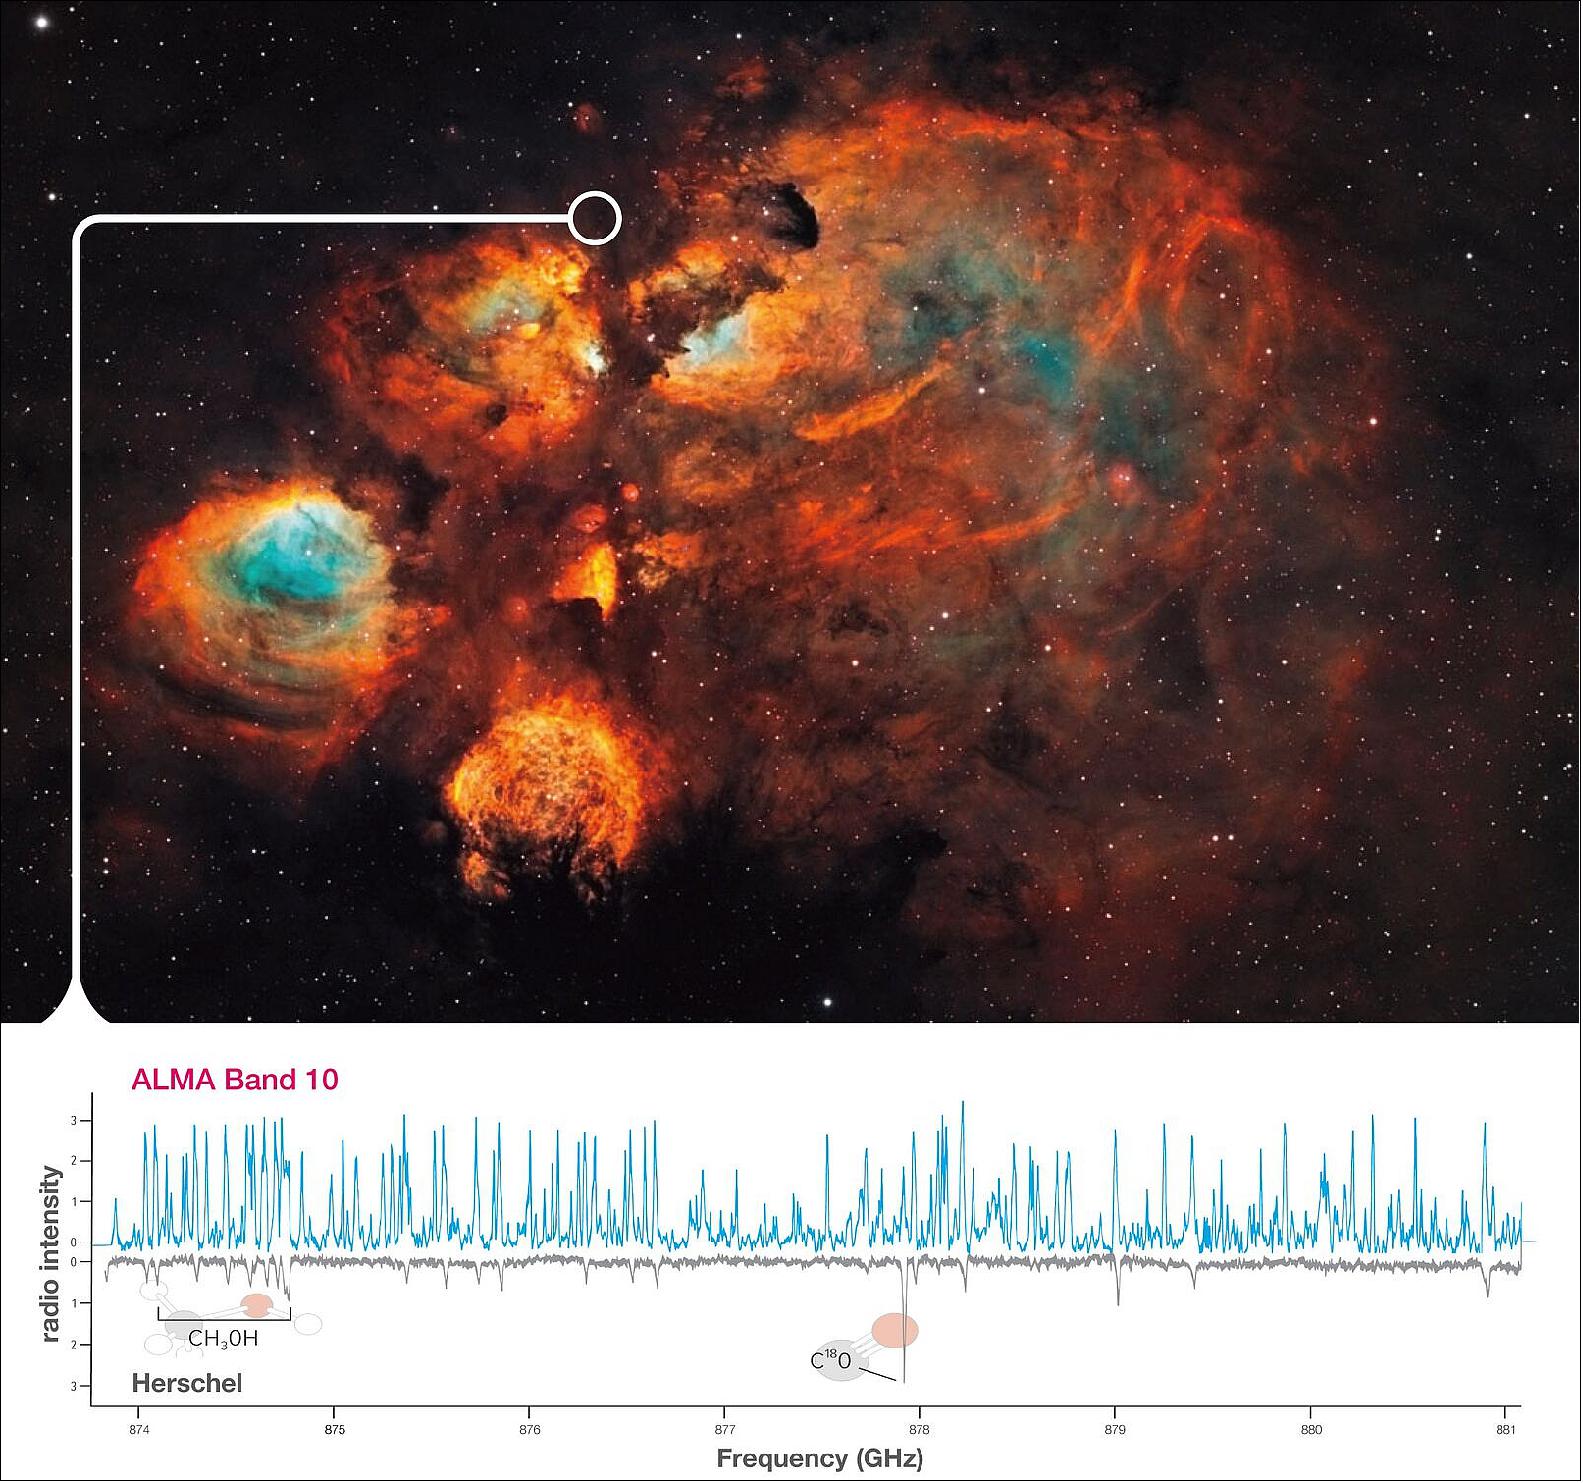 Figure 8: Photo of the star forming region NGC 6334I, also known as the Cat's Paw Nebula, taken by the NASA/ESA Hubble Space Telescope (top) and the high frequency radio spectra (bottom). The blue line shows the spectral lines detected by ALMA and the gray line shows the lines detected by the European Space Agency's Herschel Space Observatory. The ALMA observations detected more than ten times as many spectral lines. Note that the Herschel data have been inverted for comparison. Two molecular lines are labeled for reference (image credit: S. Lipinski/NASA & ESA, NAOJ, NRAO/AUI/NSF, B. McGuire et al.)